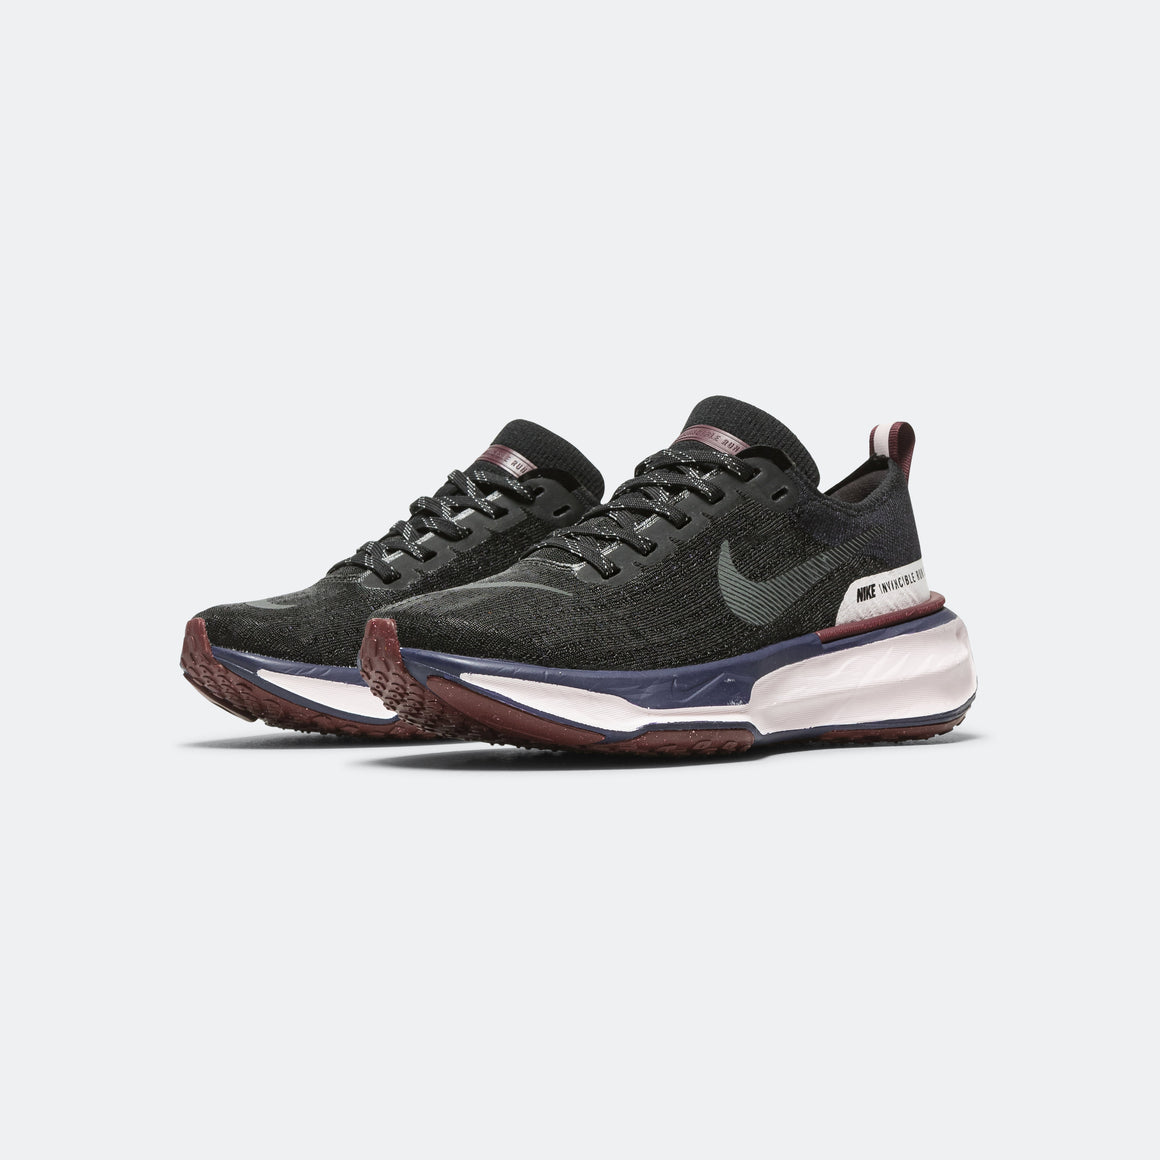 Nike - Womens ZoomX Invincible Run FK3 - Black/Iron Grey-Night Maroon-Purple Ink - Up There Athletics